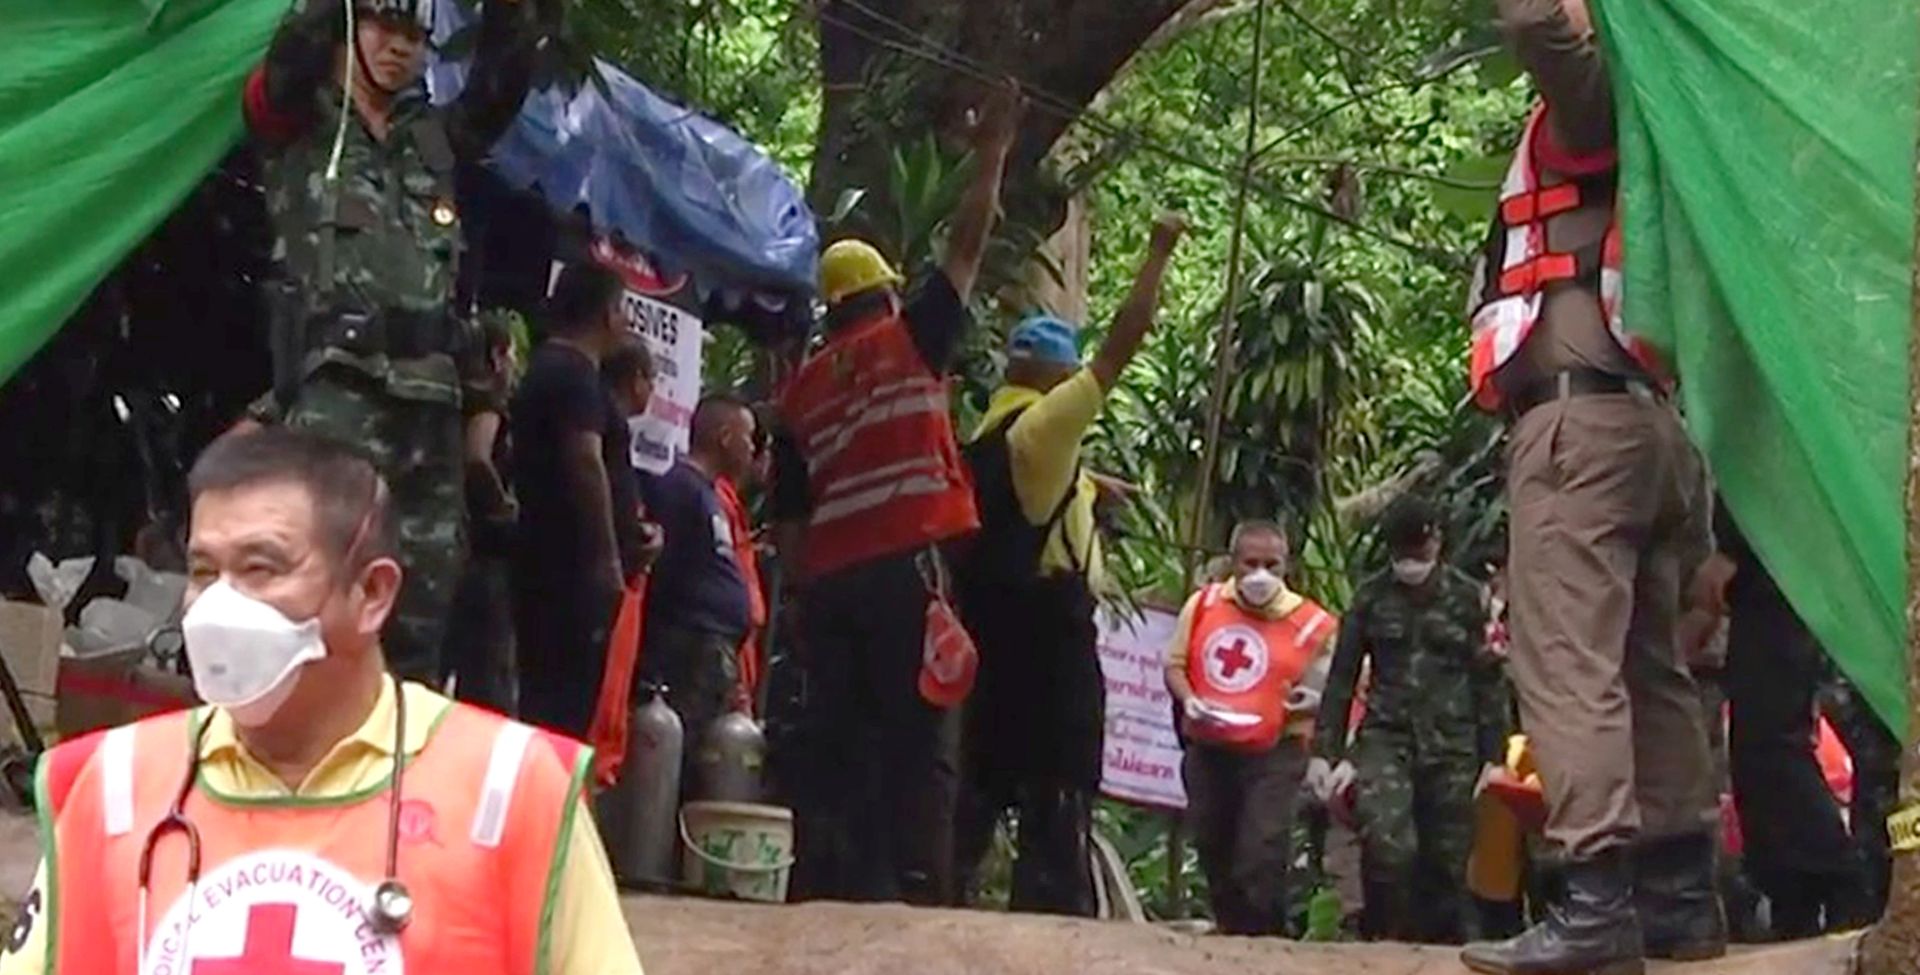 epa06874594 A handout photo made available by the Chiang Rai Public Relations Office on 09 July 2018 shows emergency workers carrying one of the boys from a youth soccer team to transport him to a hospital at Tham Luang cave in Khun Nam Nang Non Forest Park, Chiang Rai province, Thailand, 08 July 2018. According to reports, four boys have been rescued and evacuated to a hospital on 08 July 2018, as rescue operations continue for the 13 members of a youth soccer team including their assistant coach who have been trapped in Tham Luang cave since 23 June 2018. Operations are underway to safely bring out the rest of them after the oxygen tanks are refilled.  EPA/CHIANG RAI PR OFFICE HANDOUT BEST QUALITY AVAILABLE HANDOUT EDITORIAL USE ONLY/NO SALES